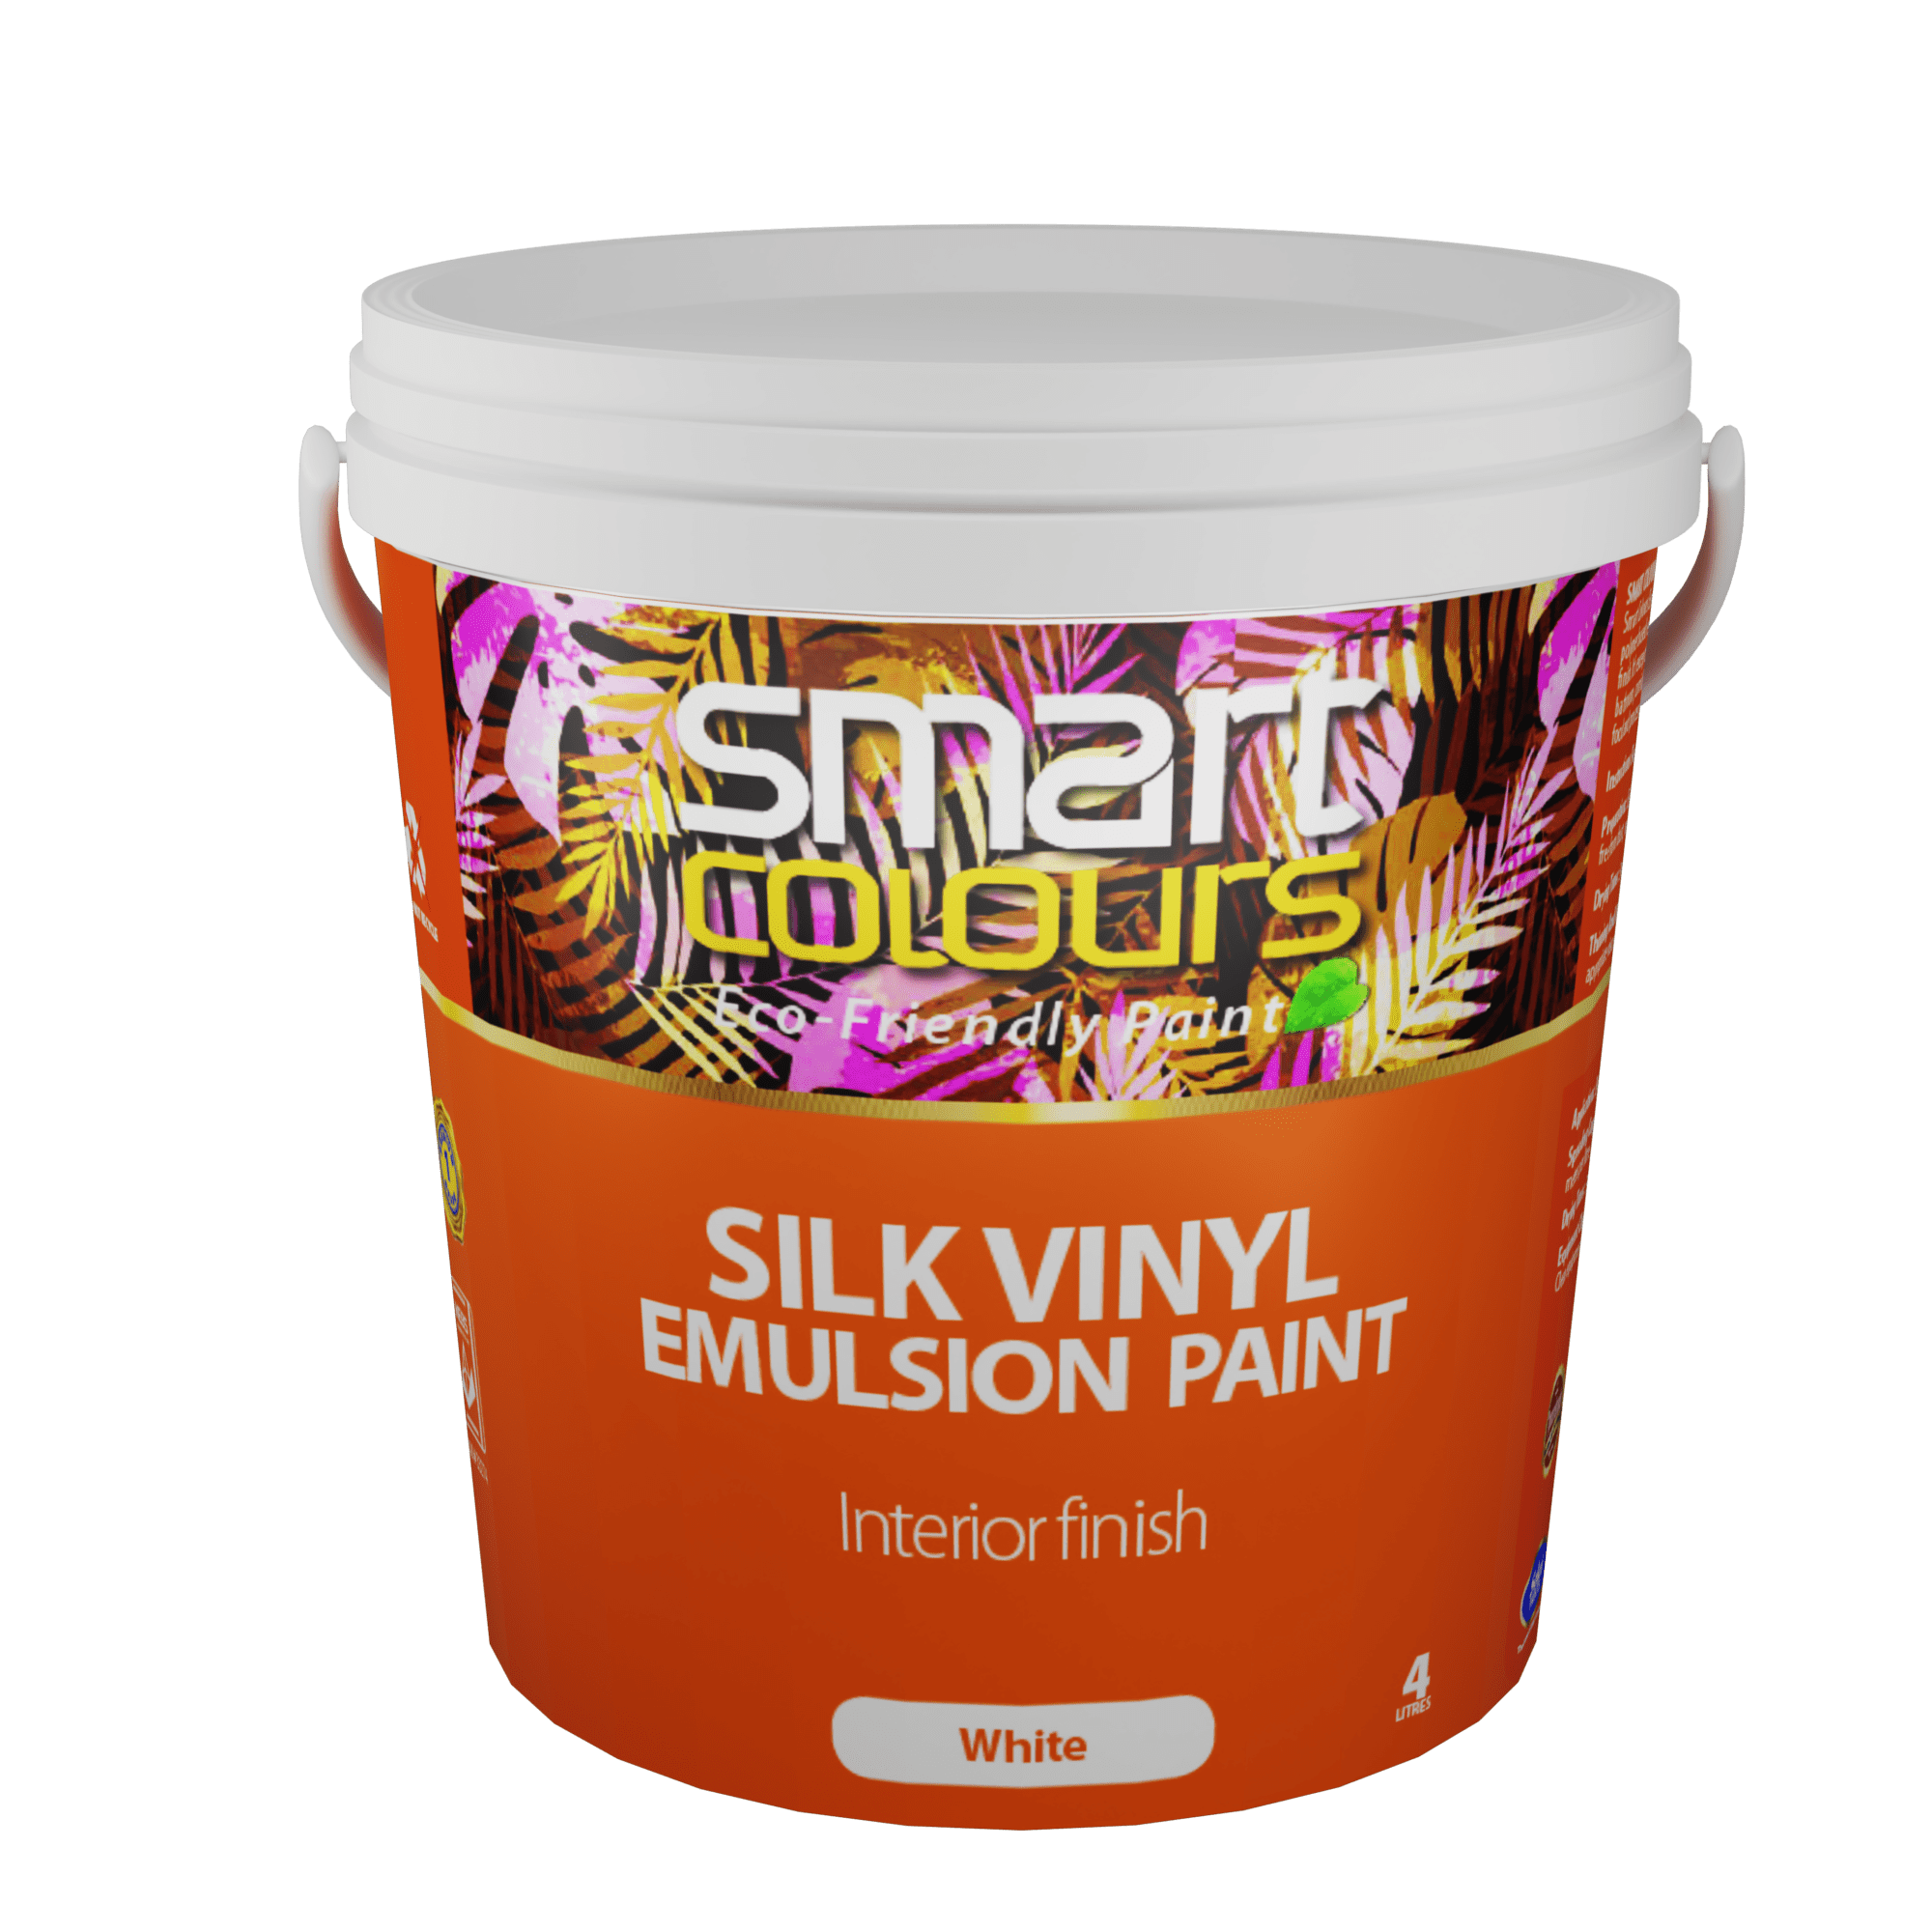 Most Affordable Silk Paint, Best Silk Paint in the Market, Quality Silk, Most Effective Silk Paint